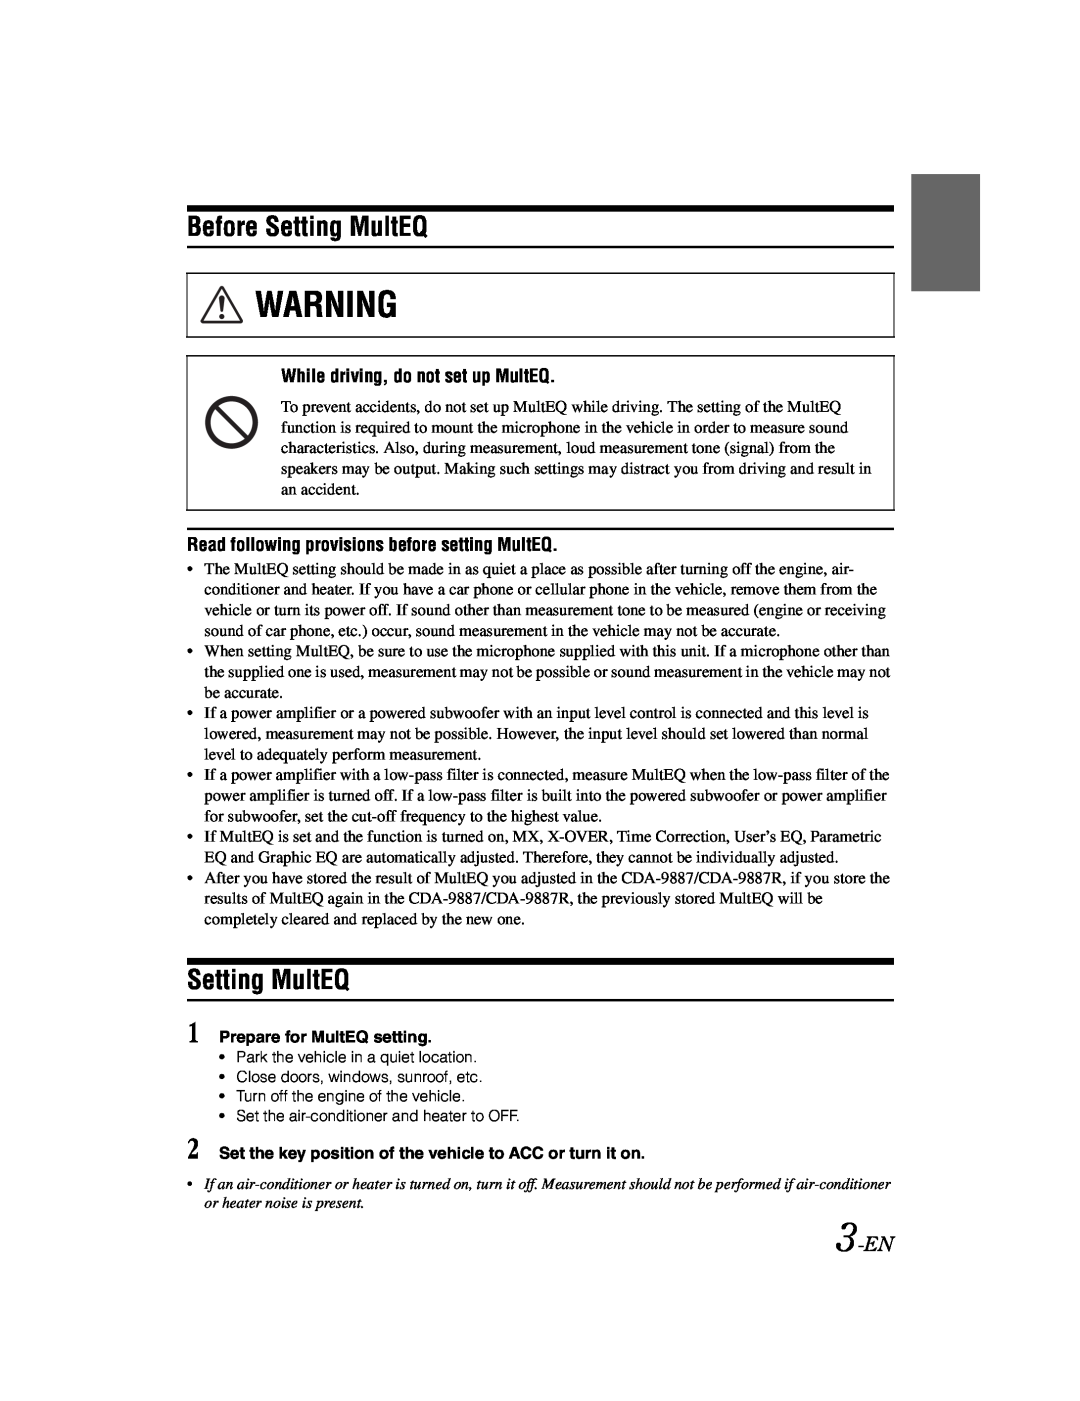 Alpine KTX-100EQ owner manual Before Setting MultEQ, 3-EN, While driving, do not set up MultEQ 